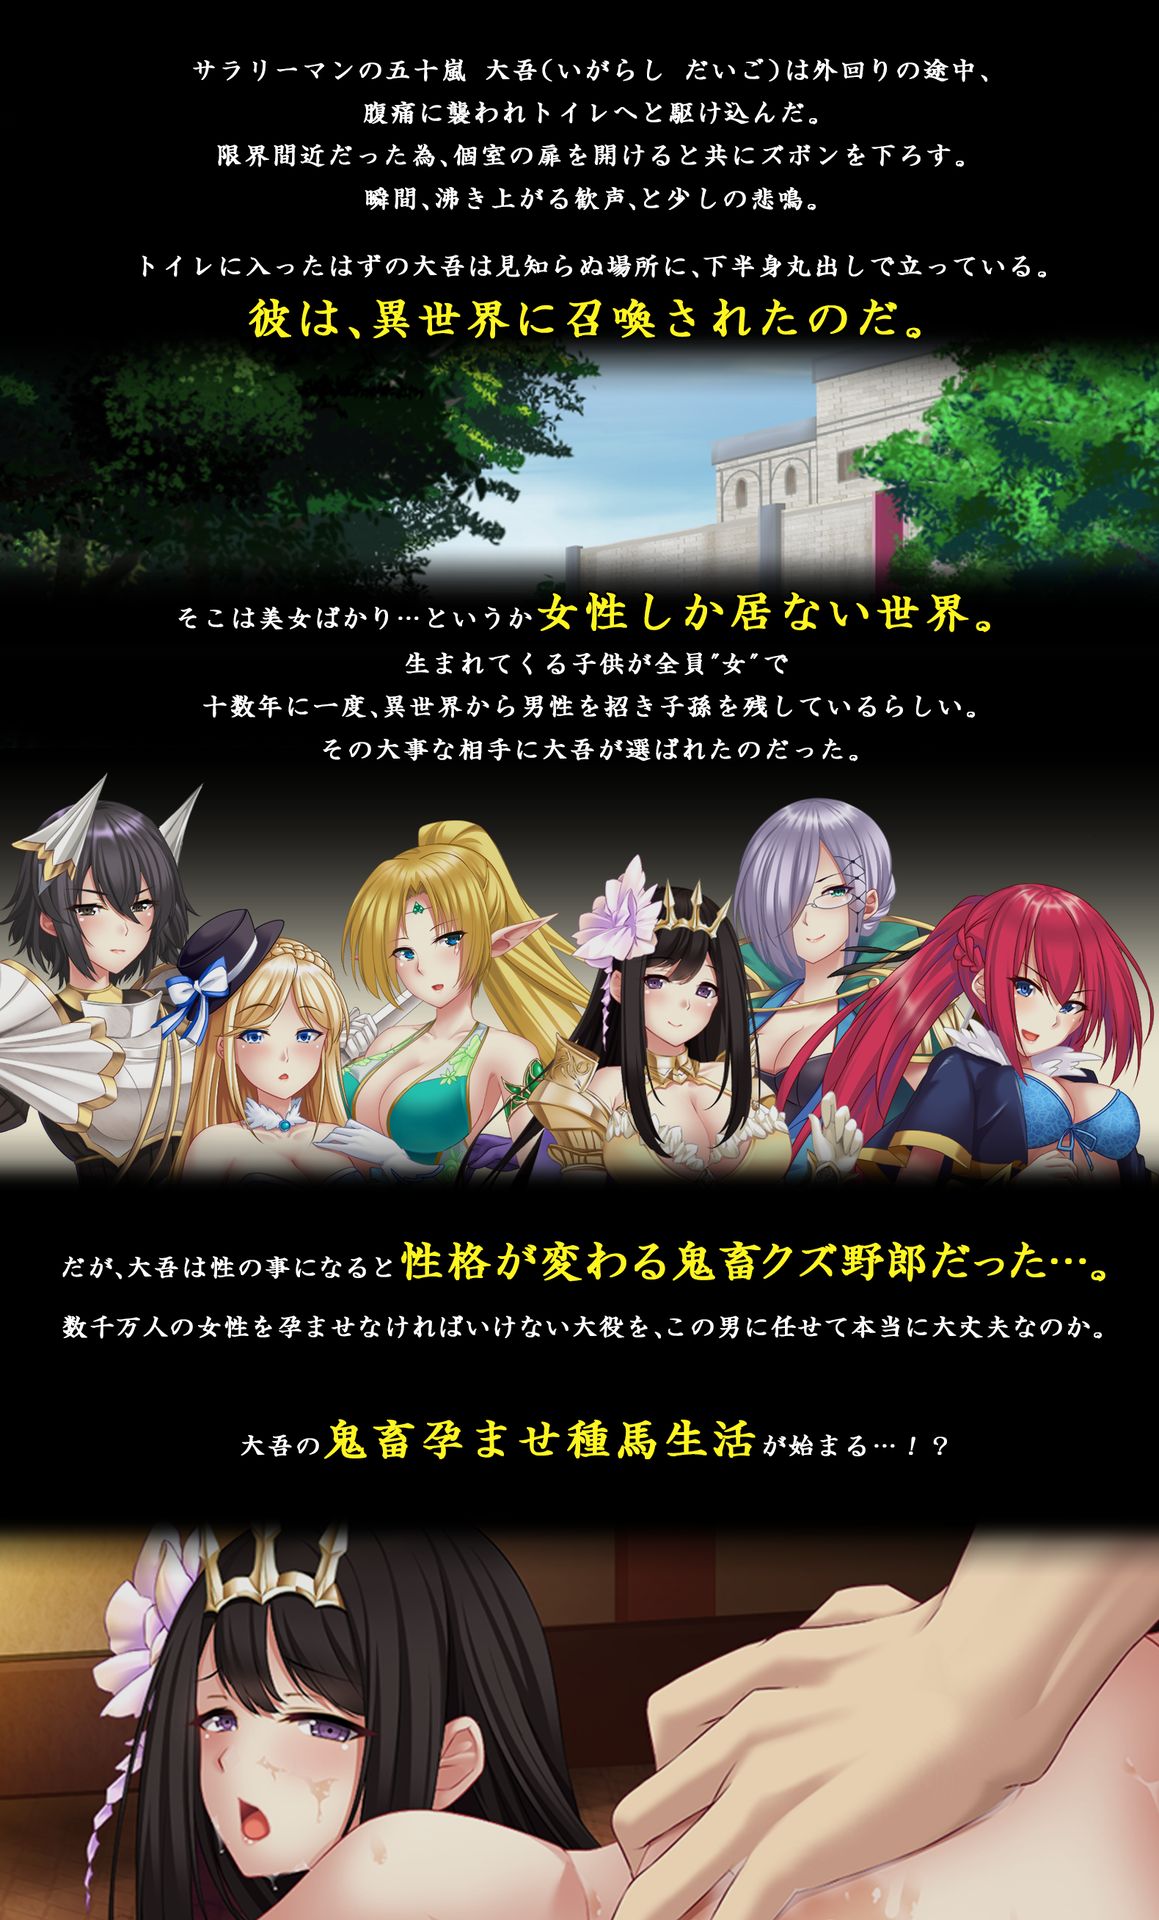 A switch version of eroge that is seeded in a different world where there are only women "I will save the other world that is too harem" 3